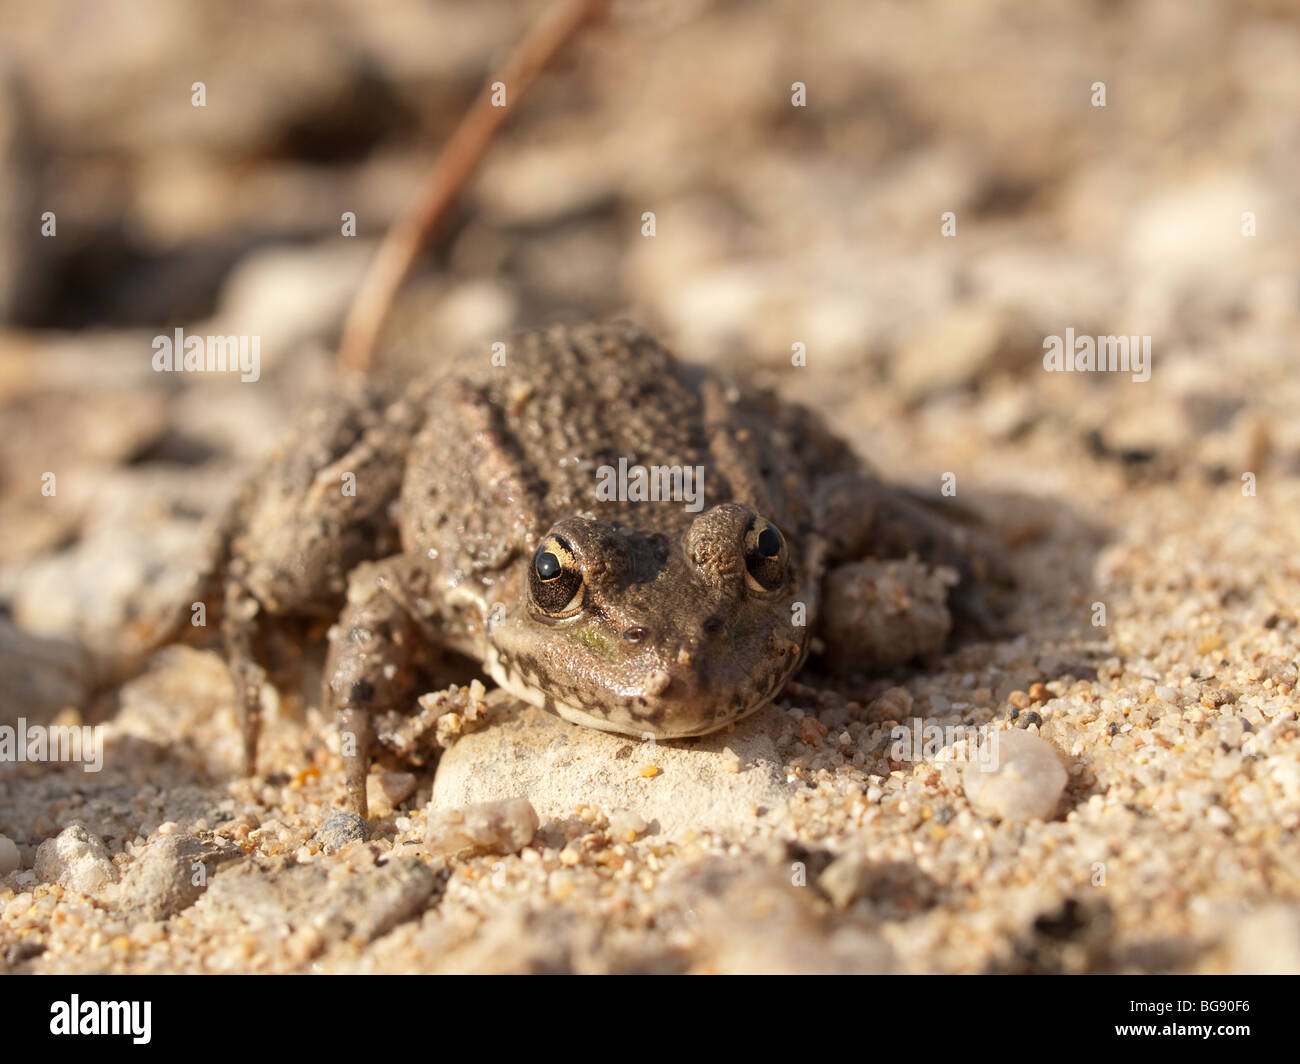 Close up of a green frog (Rana klepton esculenta) on sand, banks of river Loire, in Loiret, France. Stock Photo